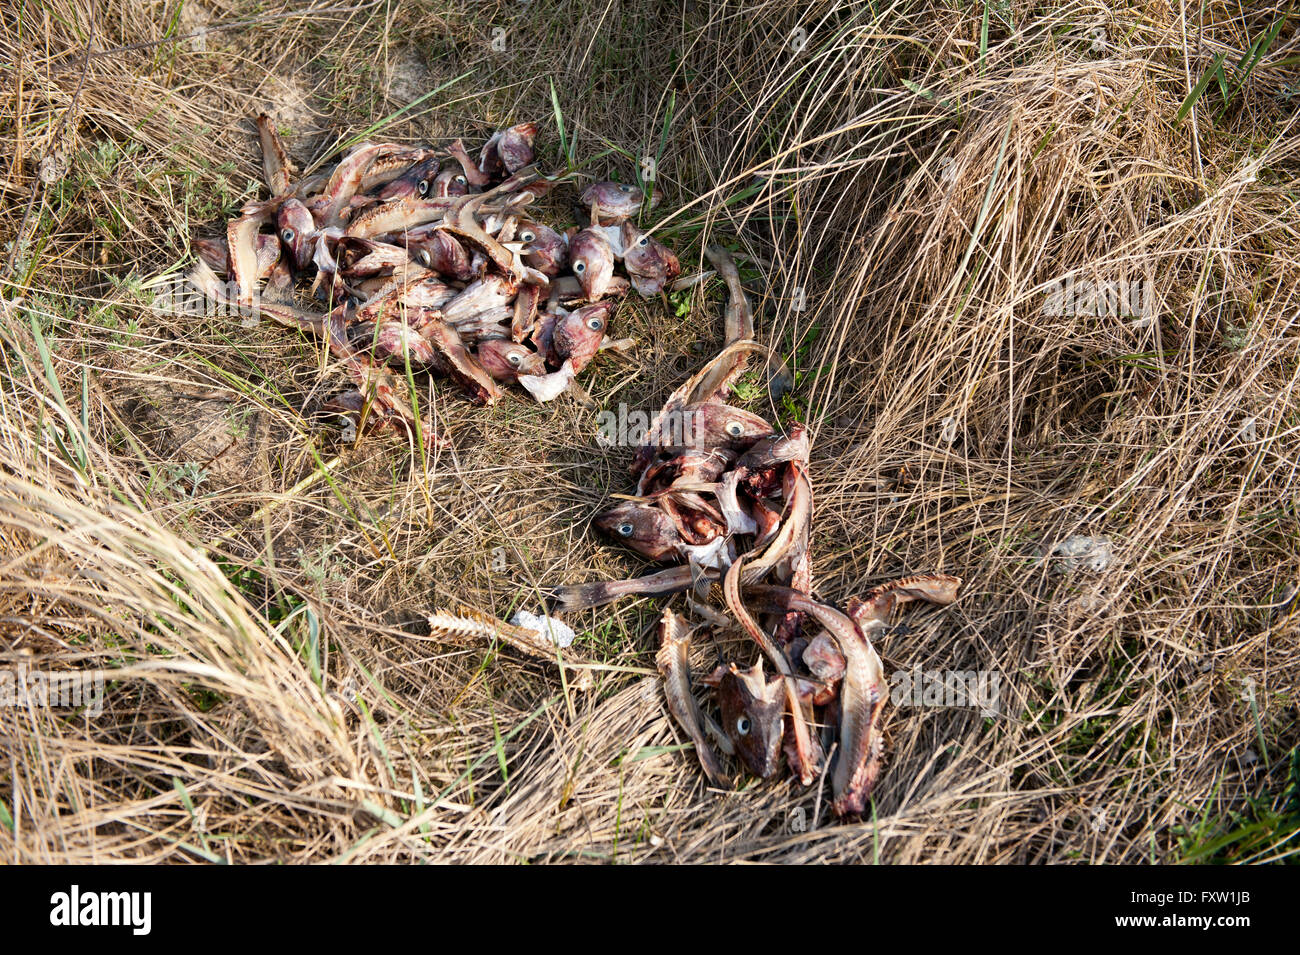 Cut sea fish heads litter lying loosely scattered in the grass in Poland, Europe. Sea animal dried food waste thrown away Stock Photo